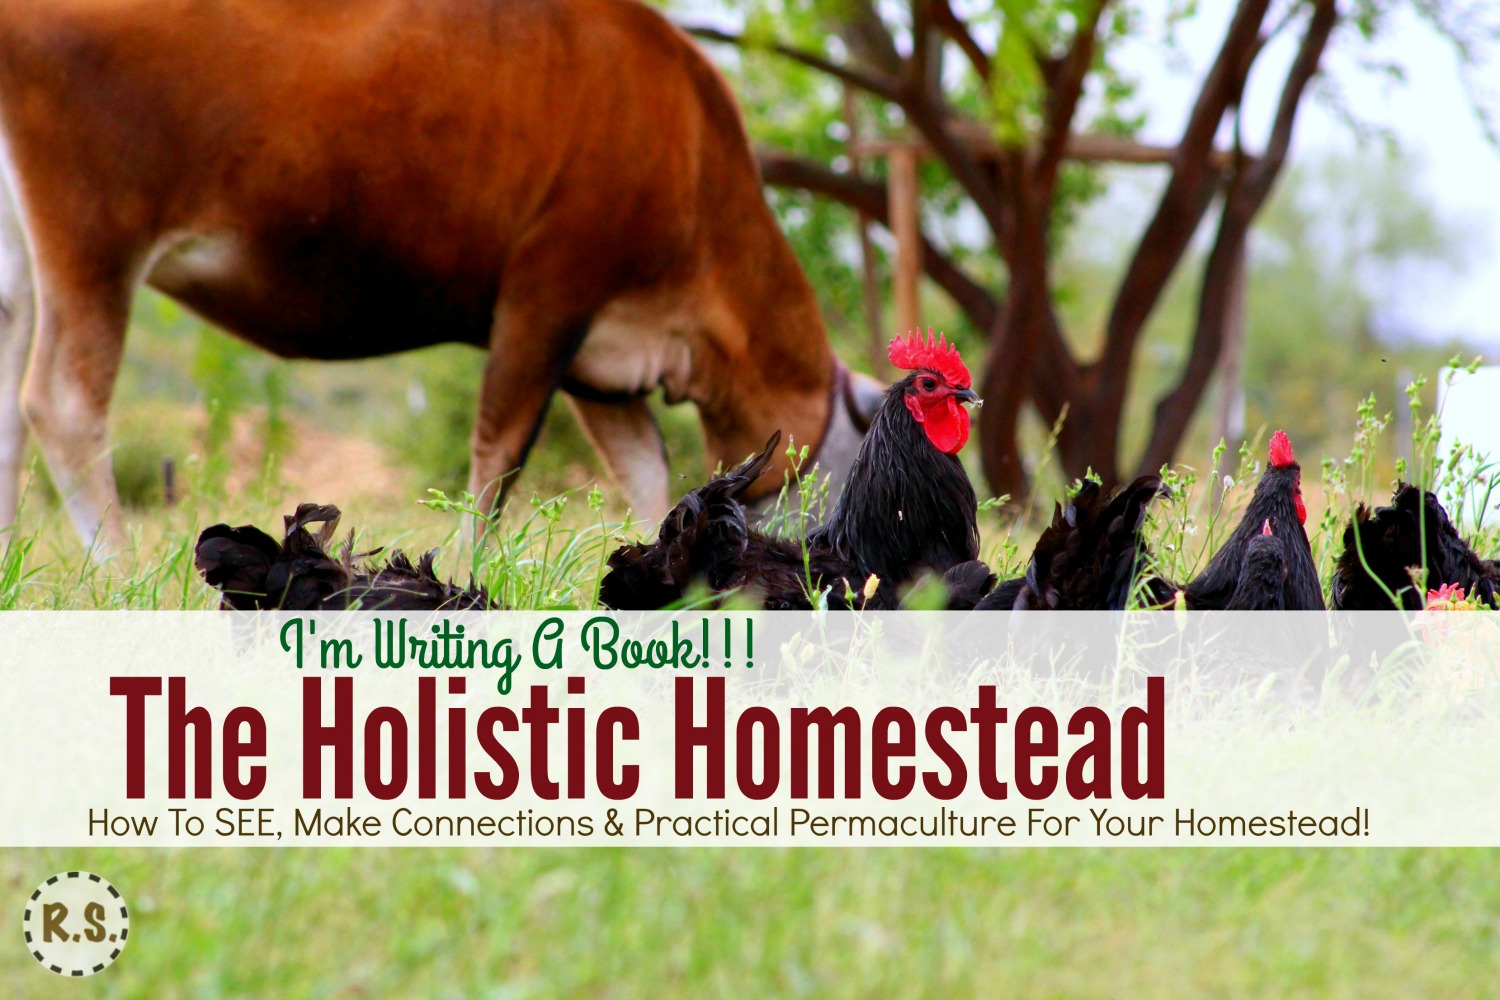 I’m writing a book!!! The Holistic Homestead. This book is designed so you SEE your homestead as a orderly system. Instead of aimlessness, it’s how-to homestead with purpose!